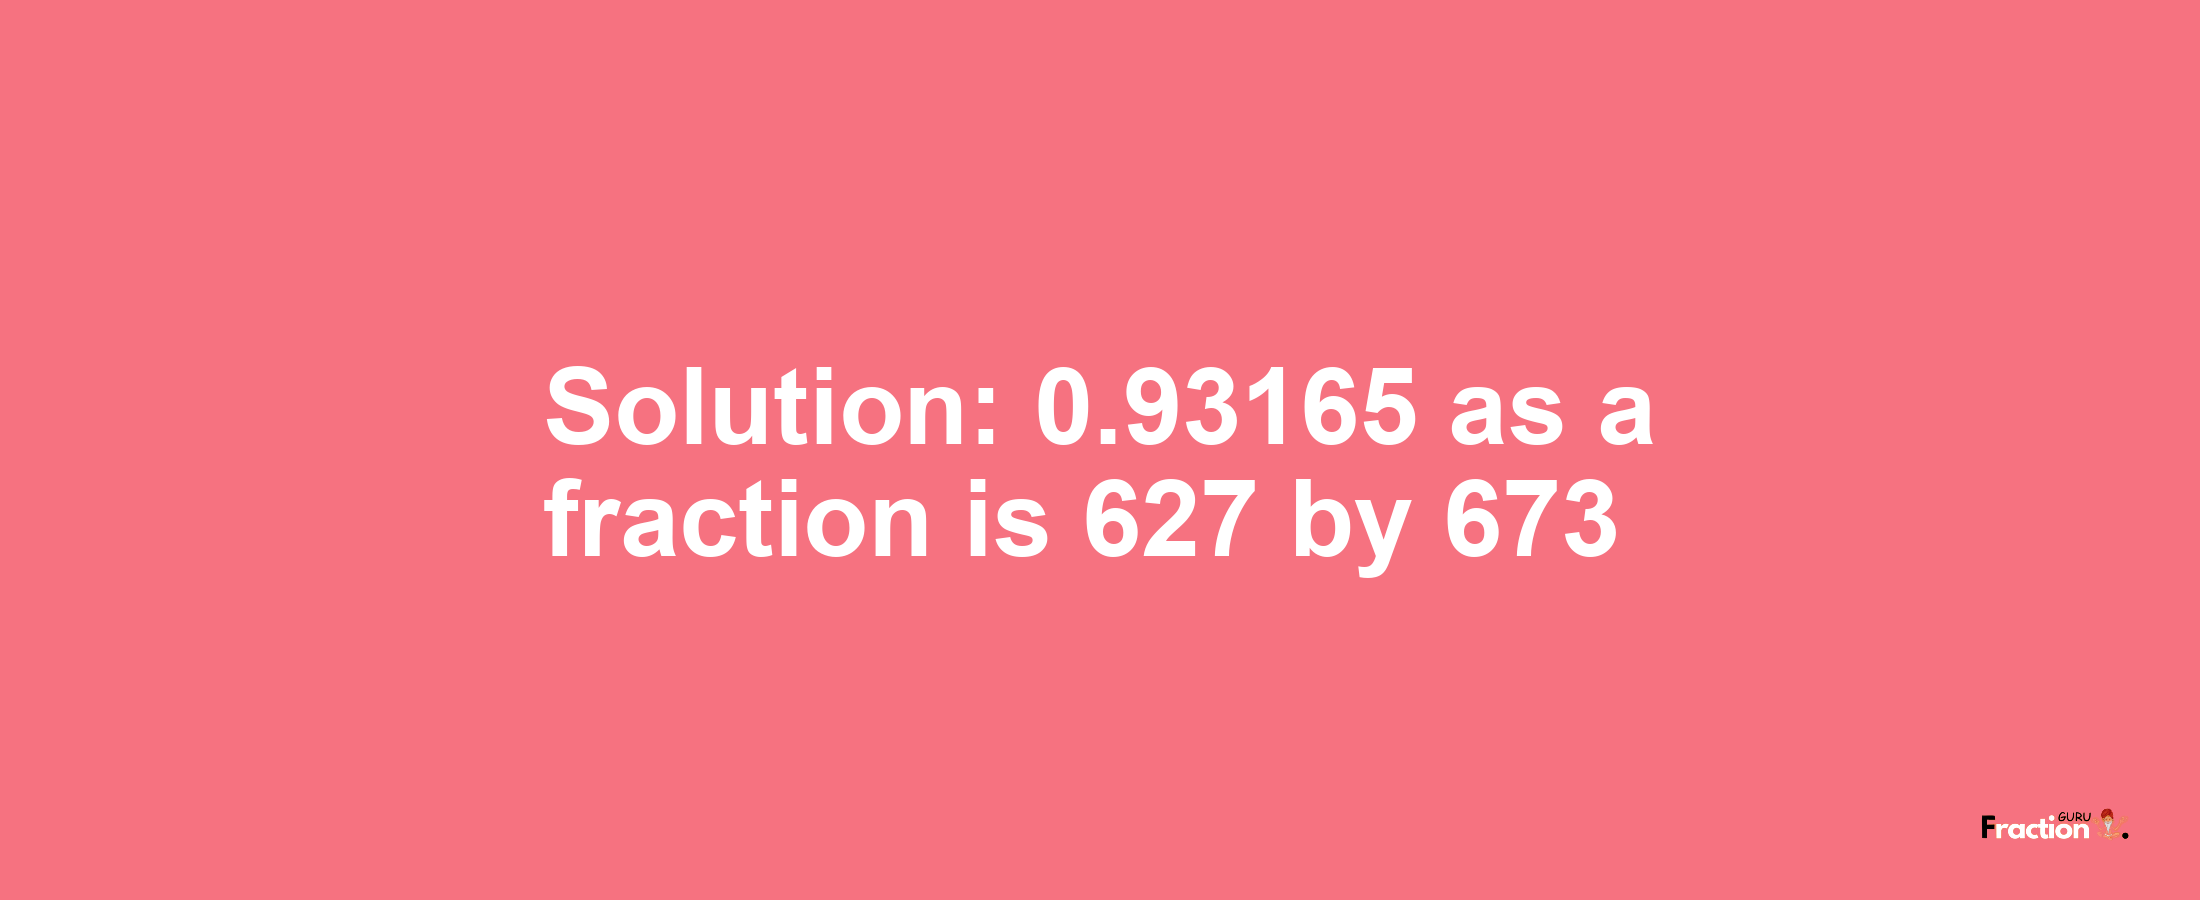 Solution:0.93165 as a fraction is 627/673